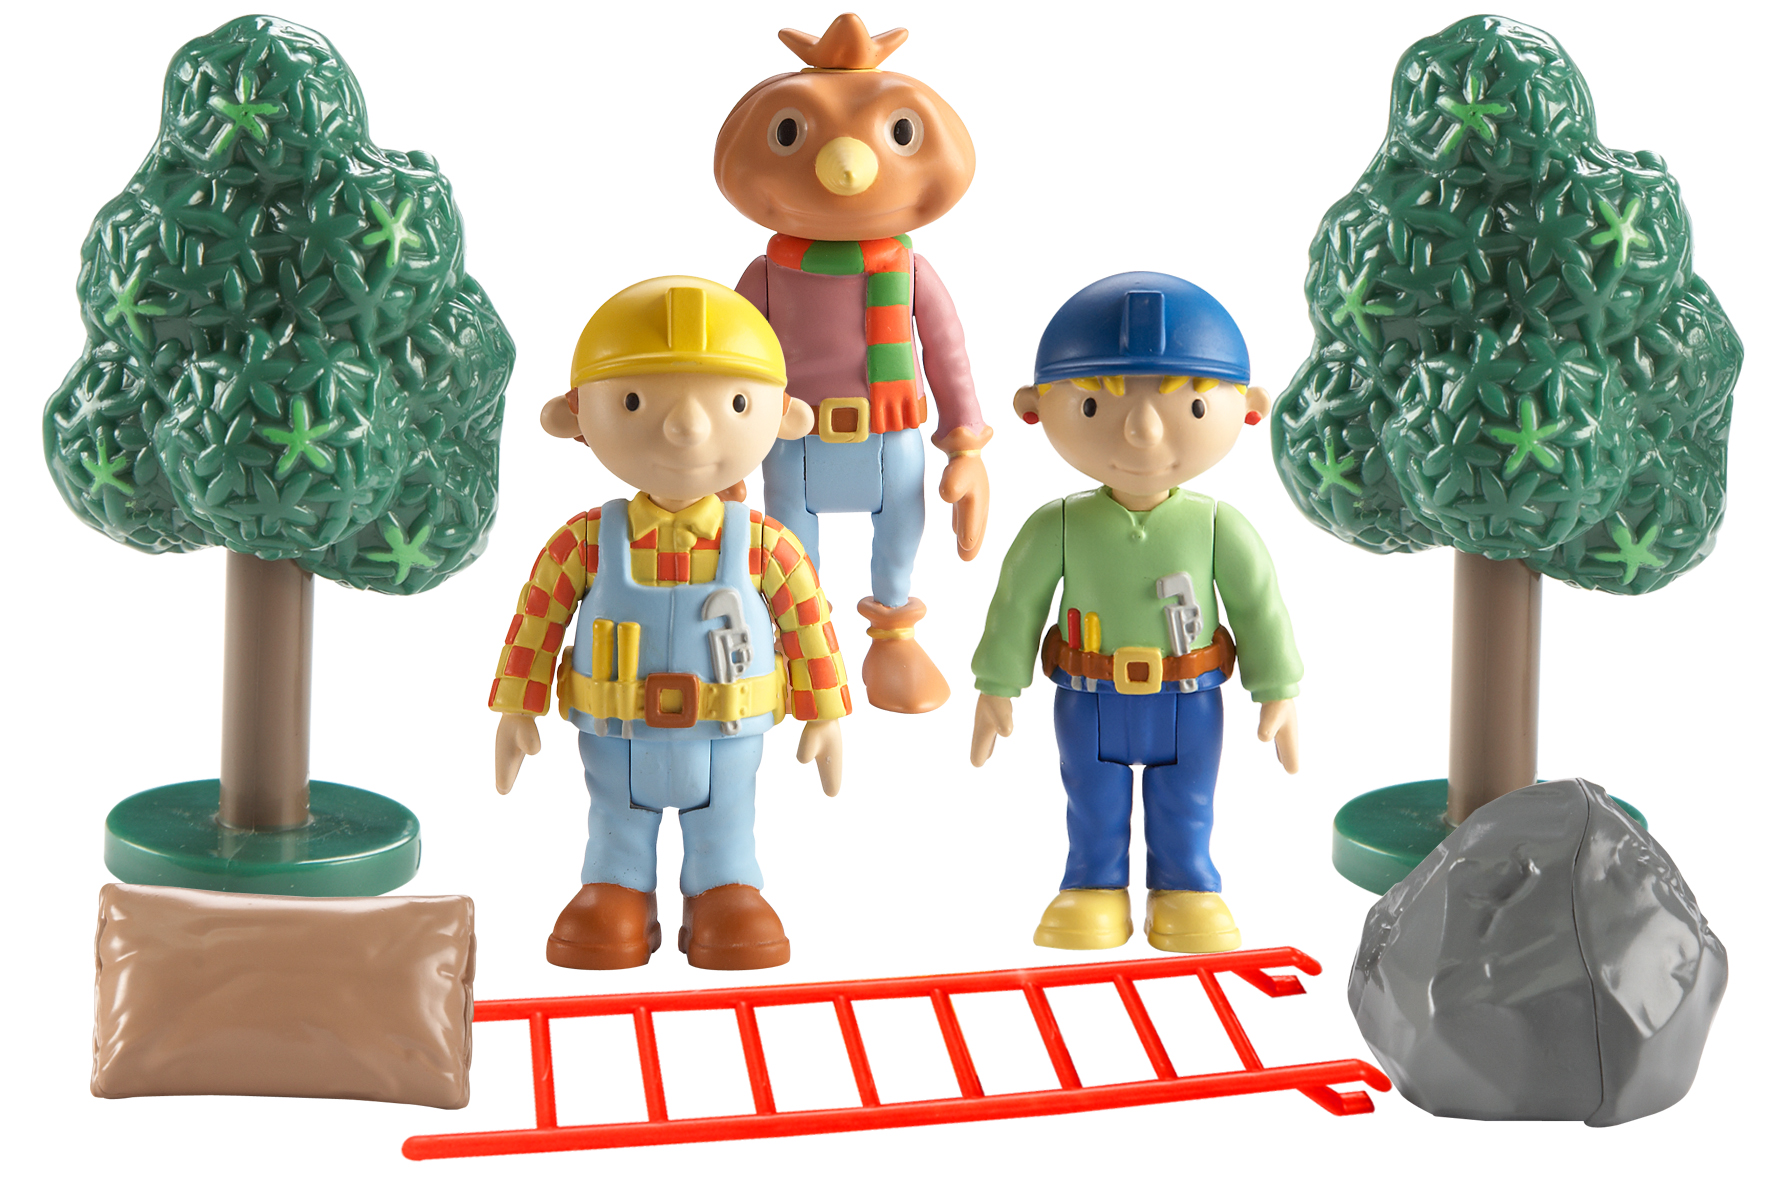 Bob the Builder Figure and Accessory Pack